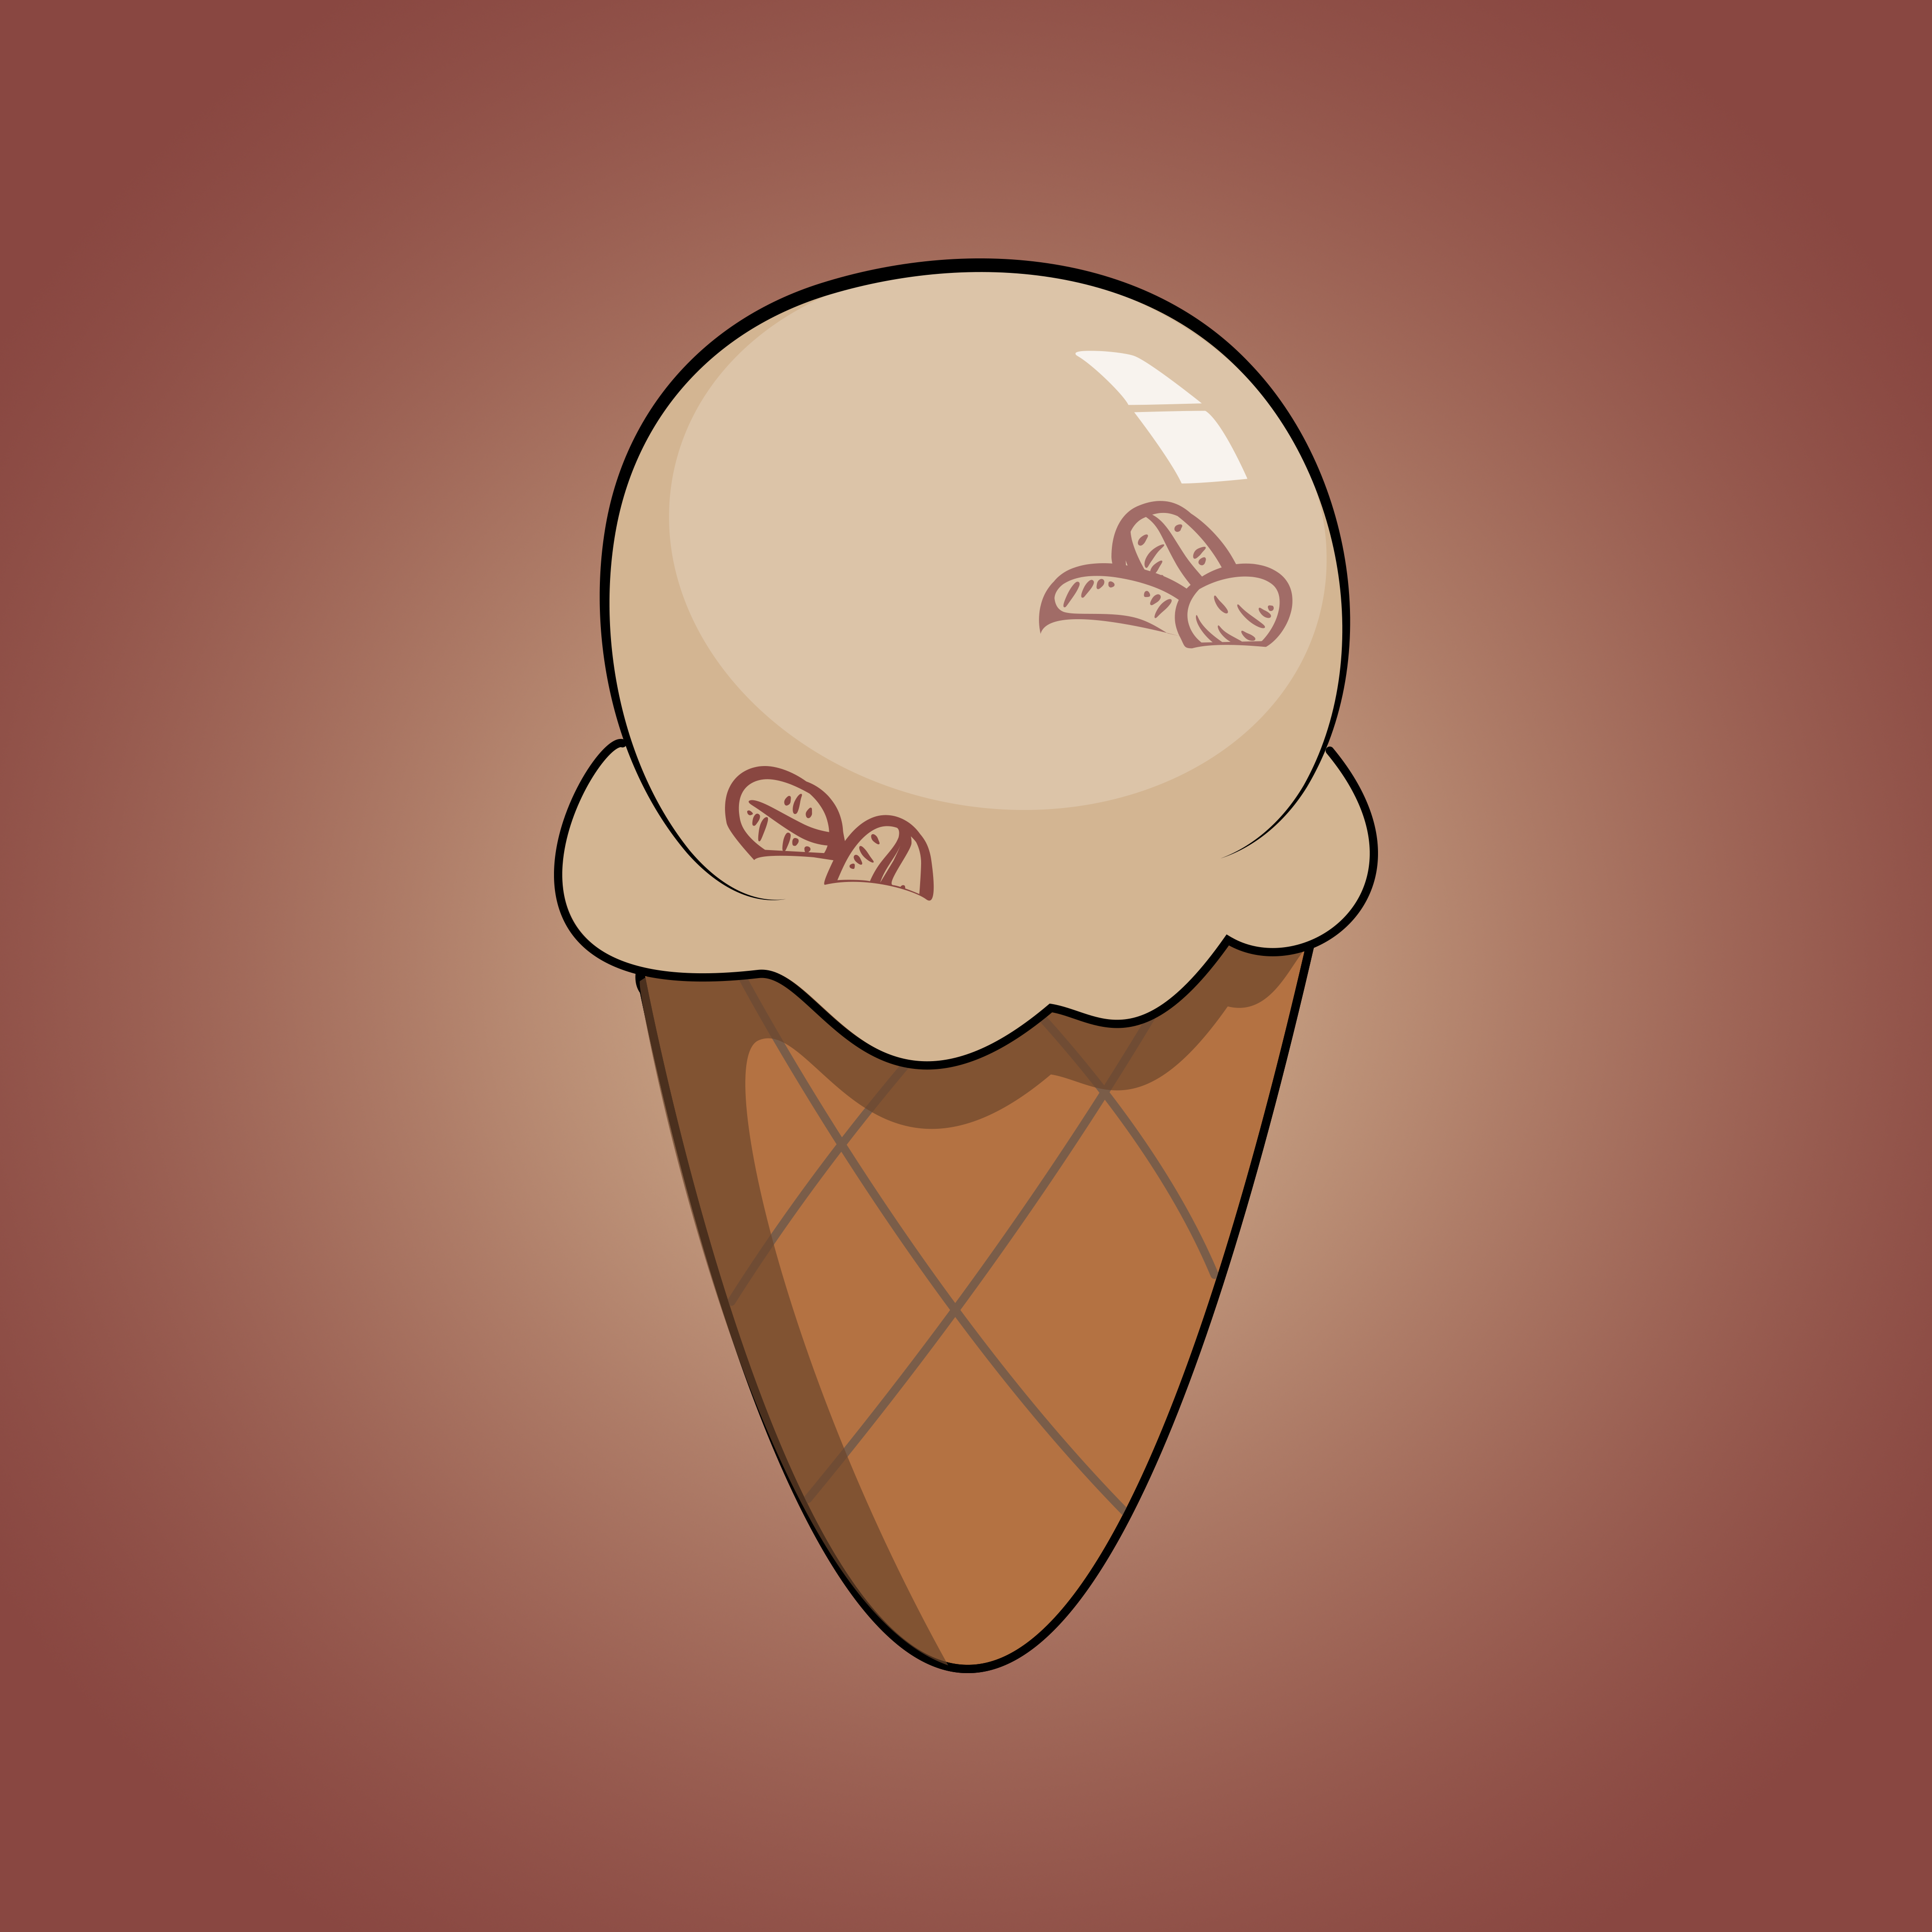 Coffee ice cream cone with background